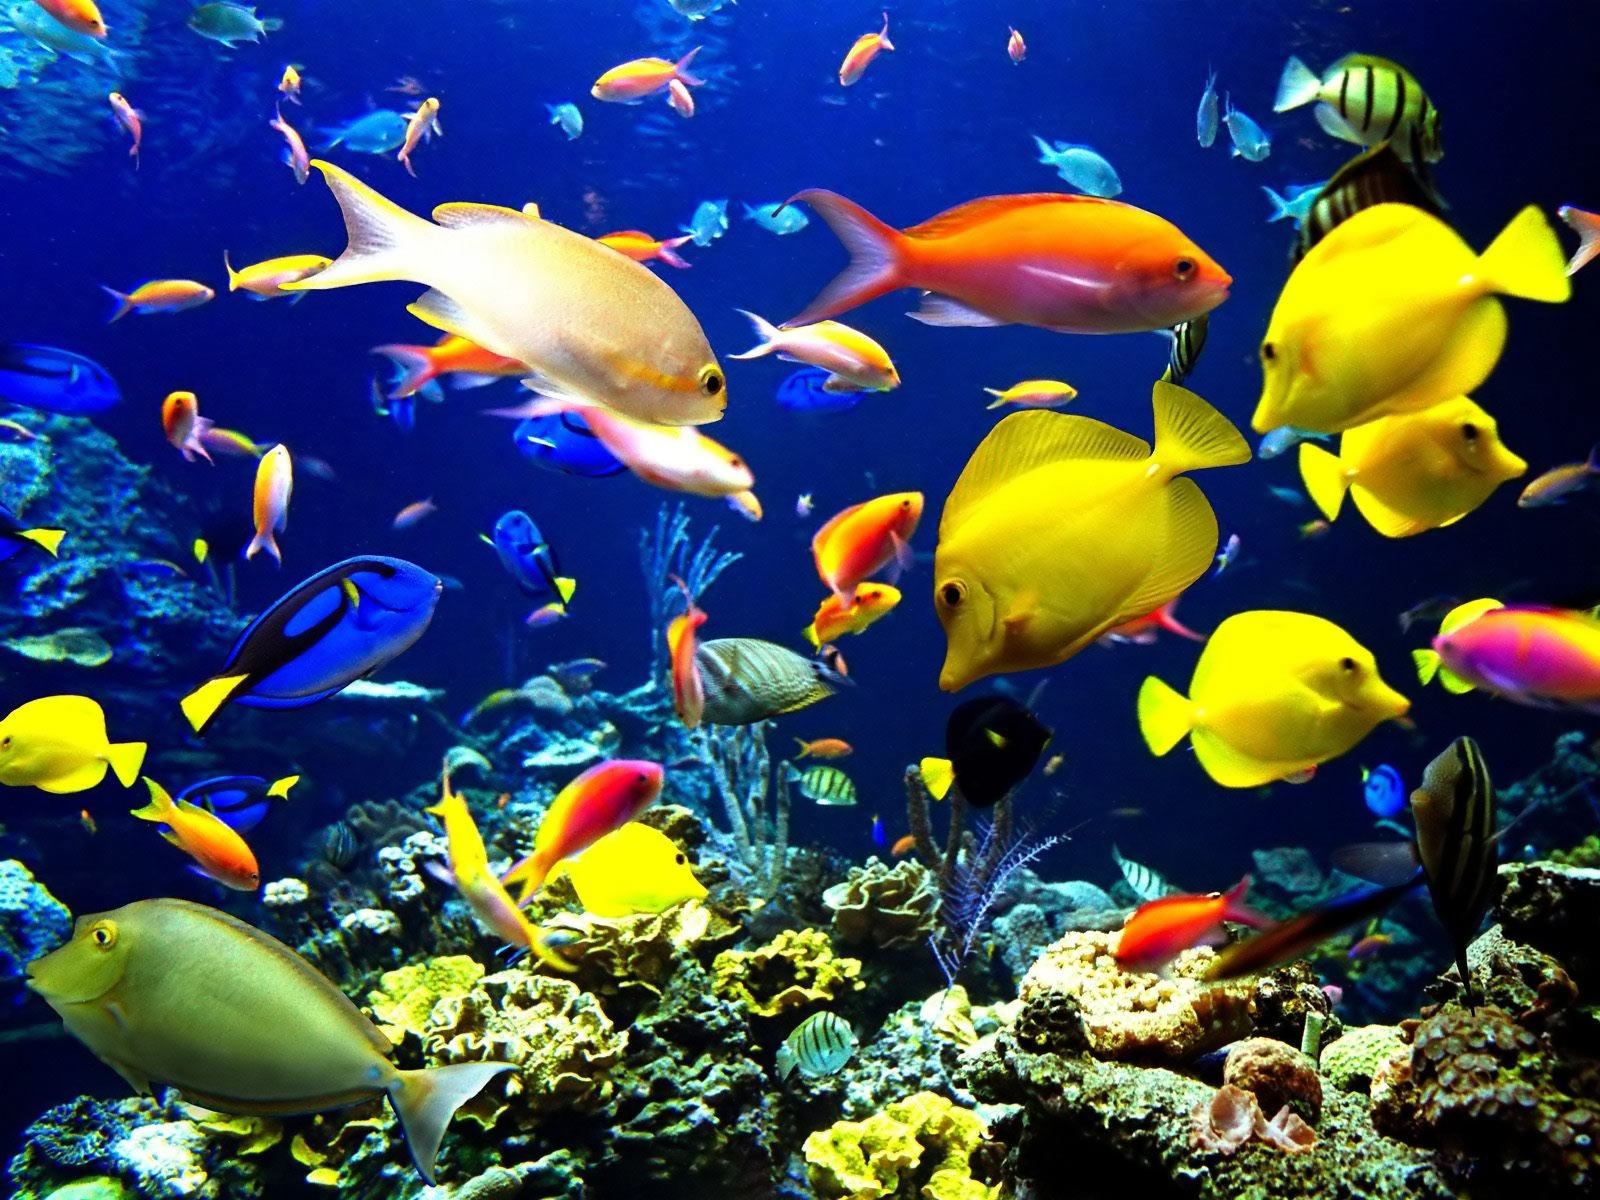  Android Live Fish Wallpaper 1600x1200 Full HD Wallpapers 1600x1200